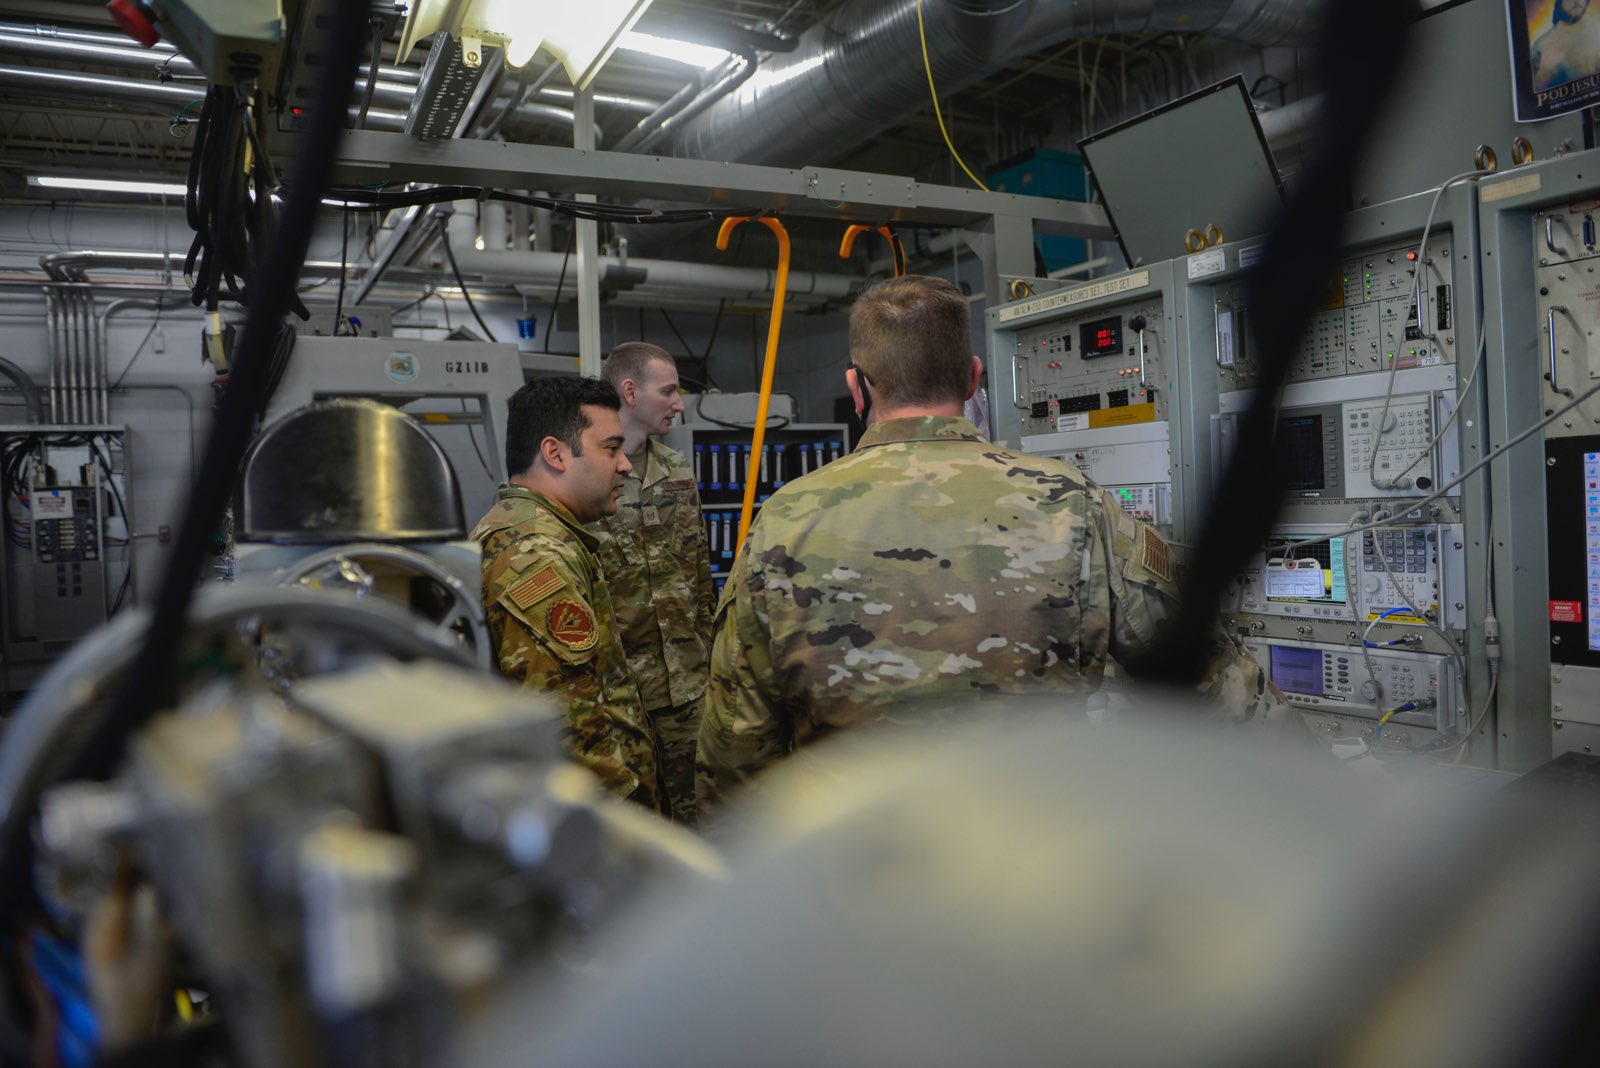 Airmen from the 36th Electronic Warfare Squadron calibrate automatic support equipment at Eglin Air Force Base, Florida, August 29, 2022. The 36th EWS provides missionized software for jamming and detection systems to ensure aircraft survivability. <em>Credit: U.S. Air Force photo by Staff Sgt. Ericka A. Woolever</em>